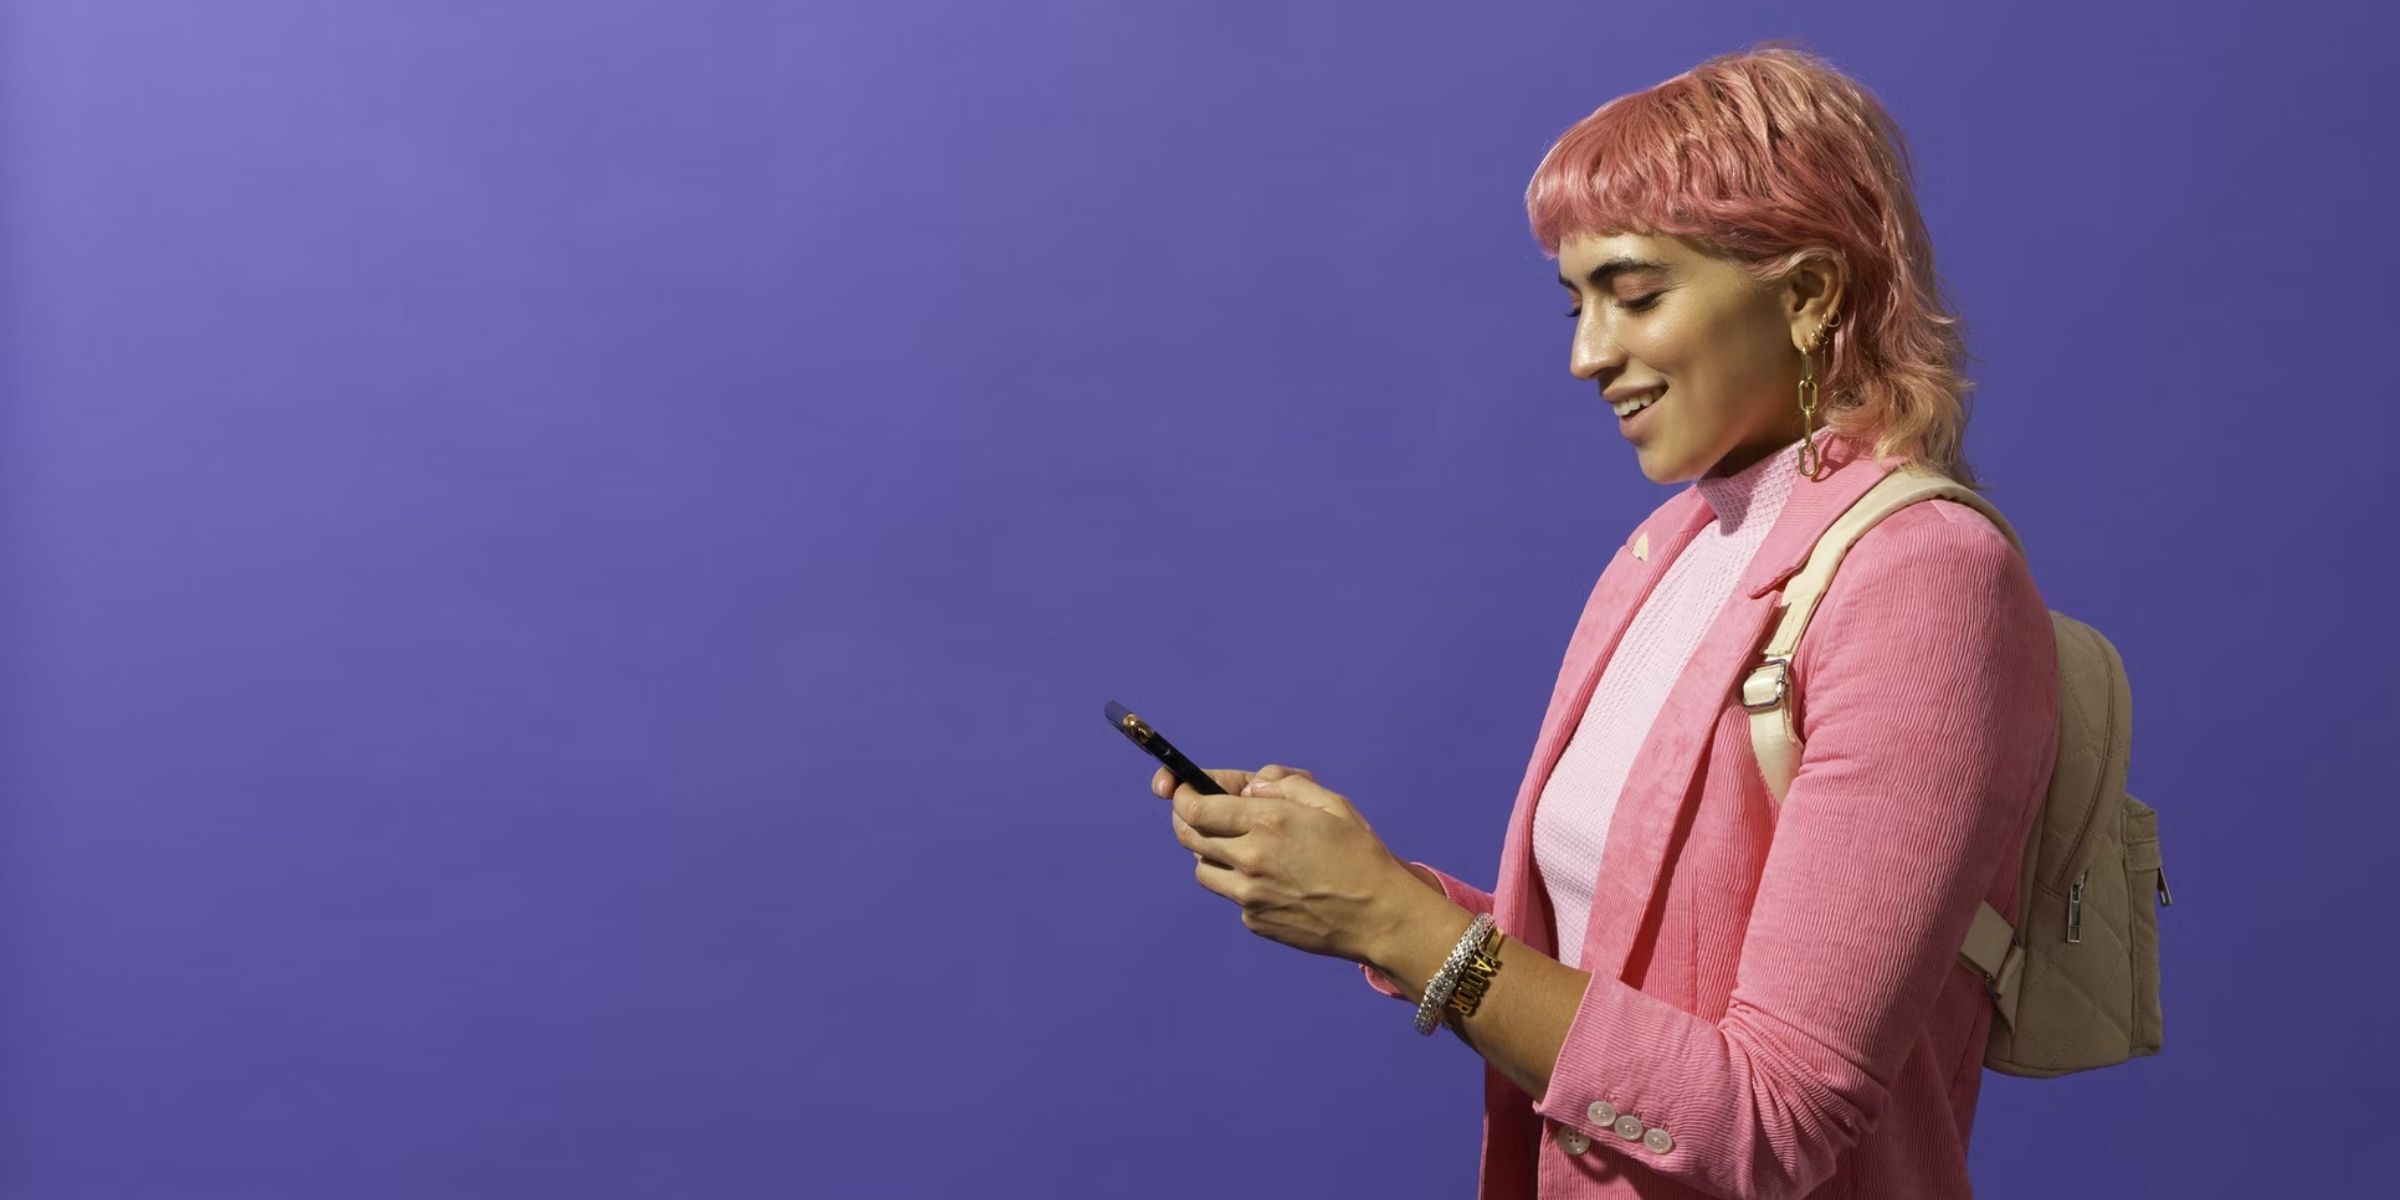 a student with pink hair and clothing smiling at their cell phone